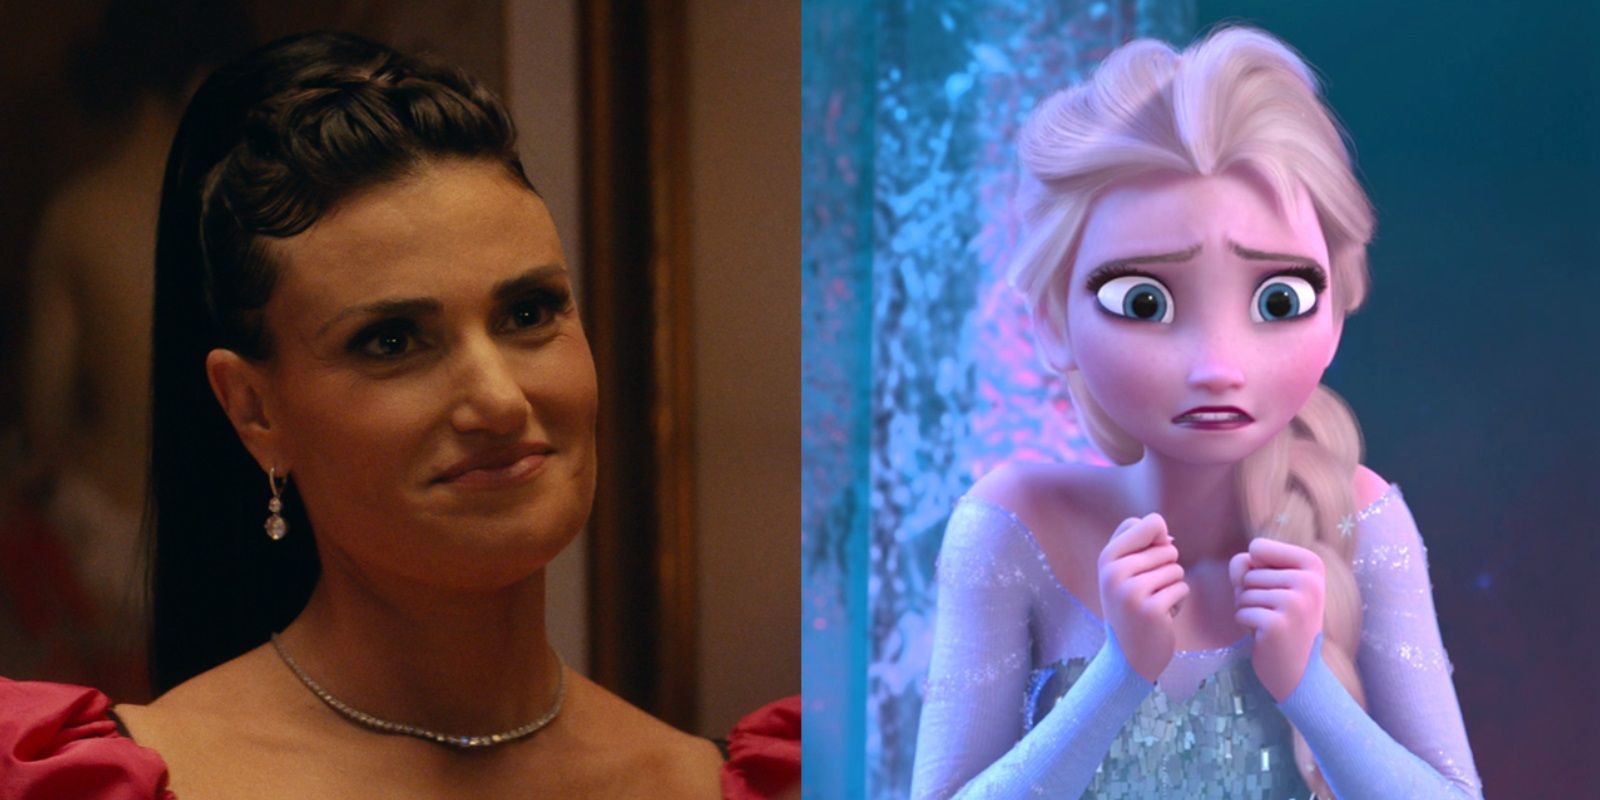 Who is the Voice of Elsa in Frozen?